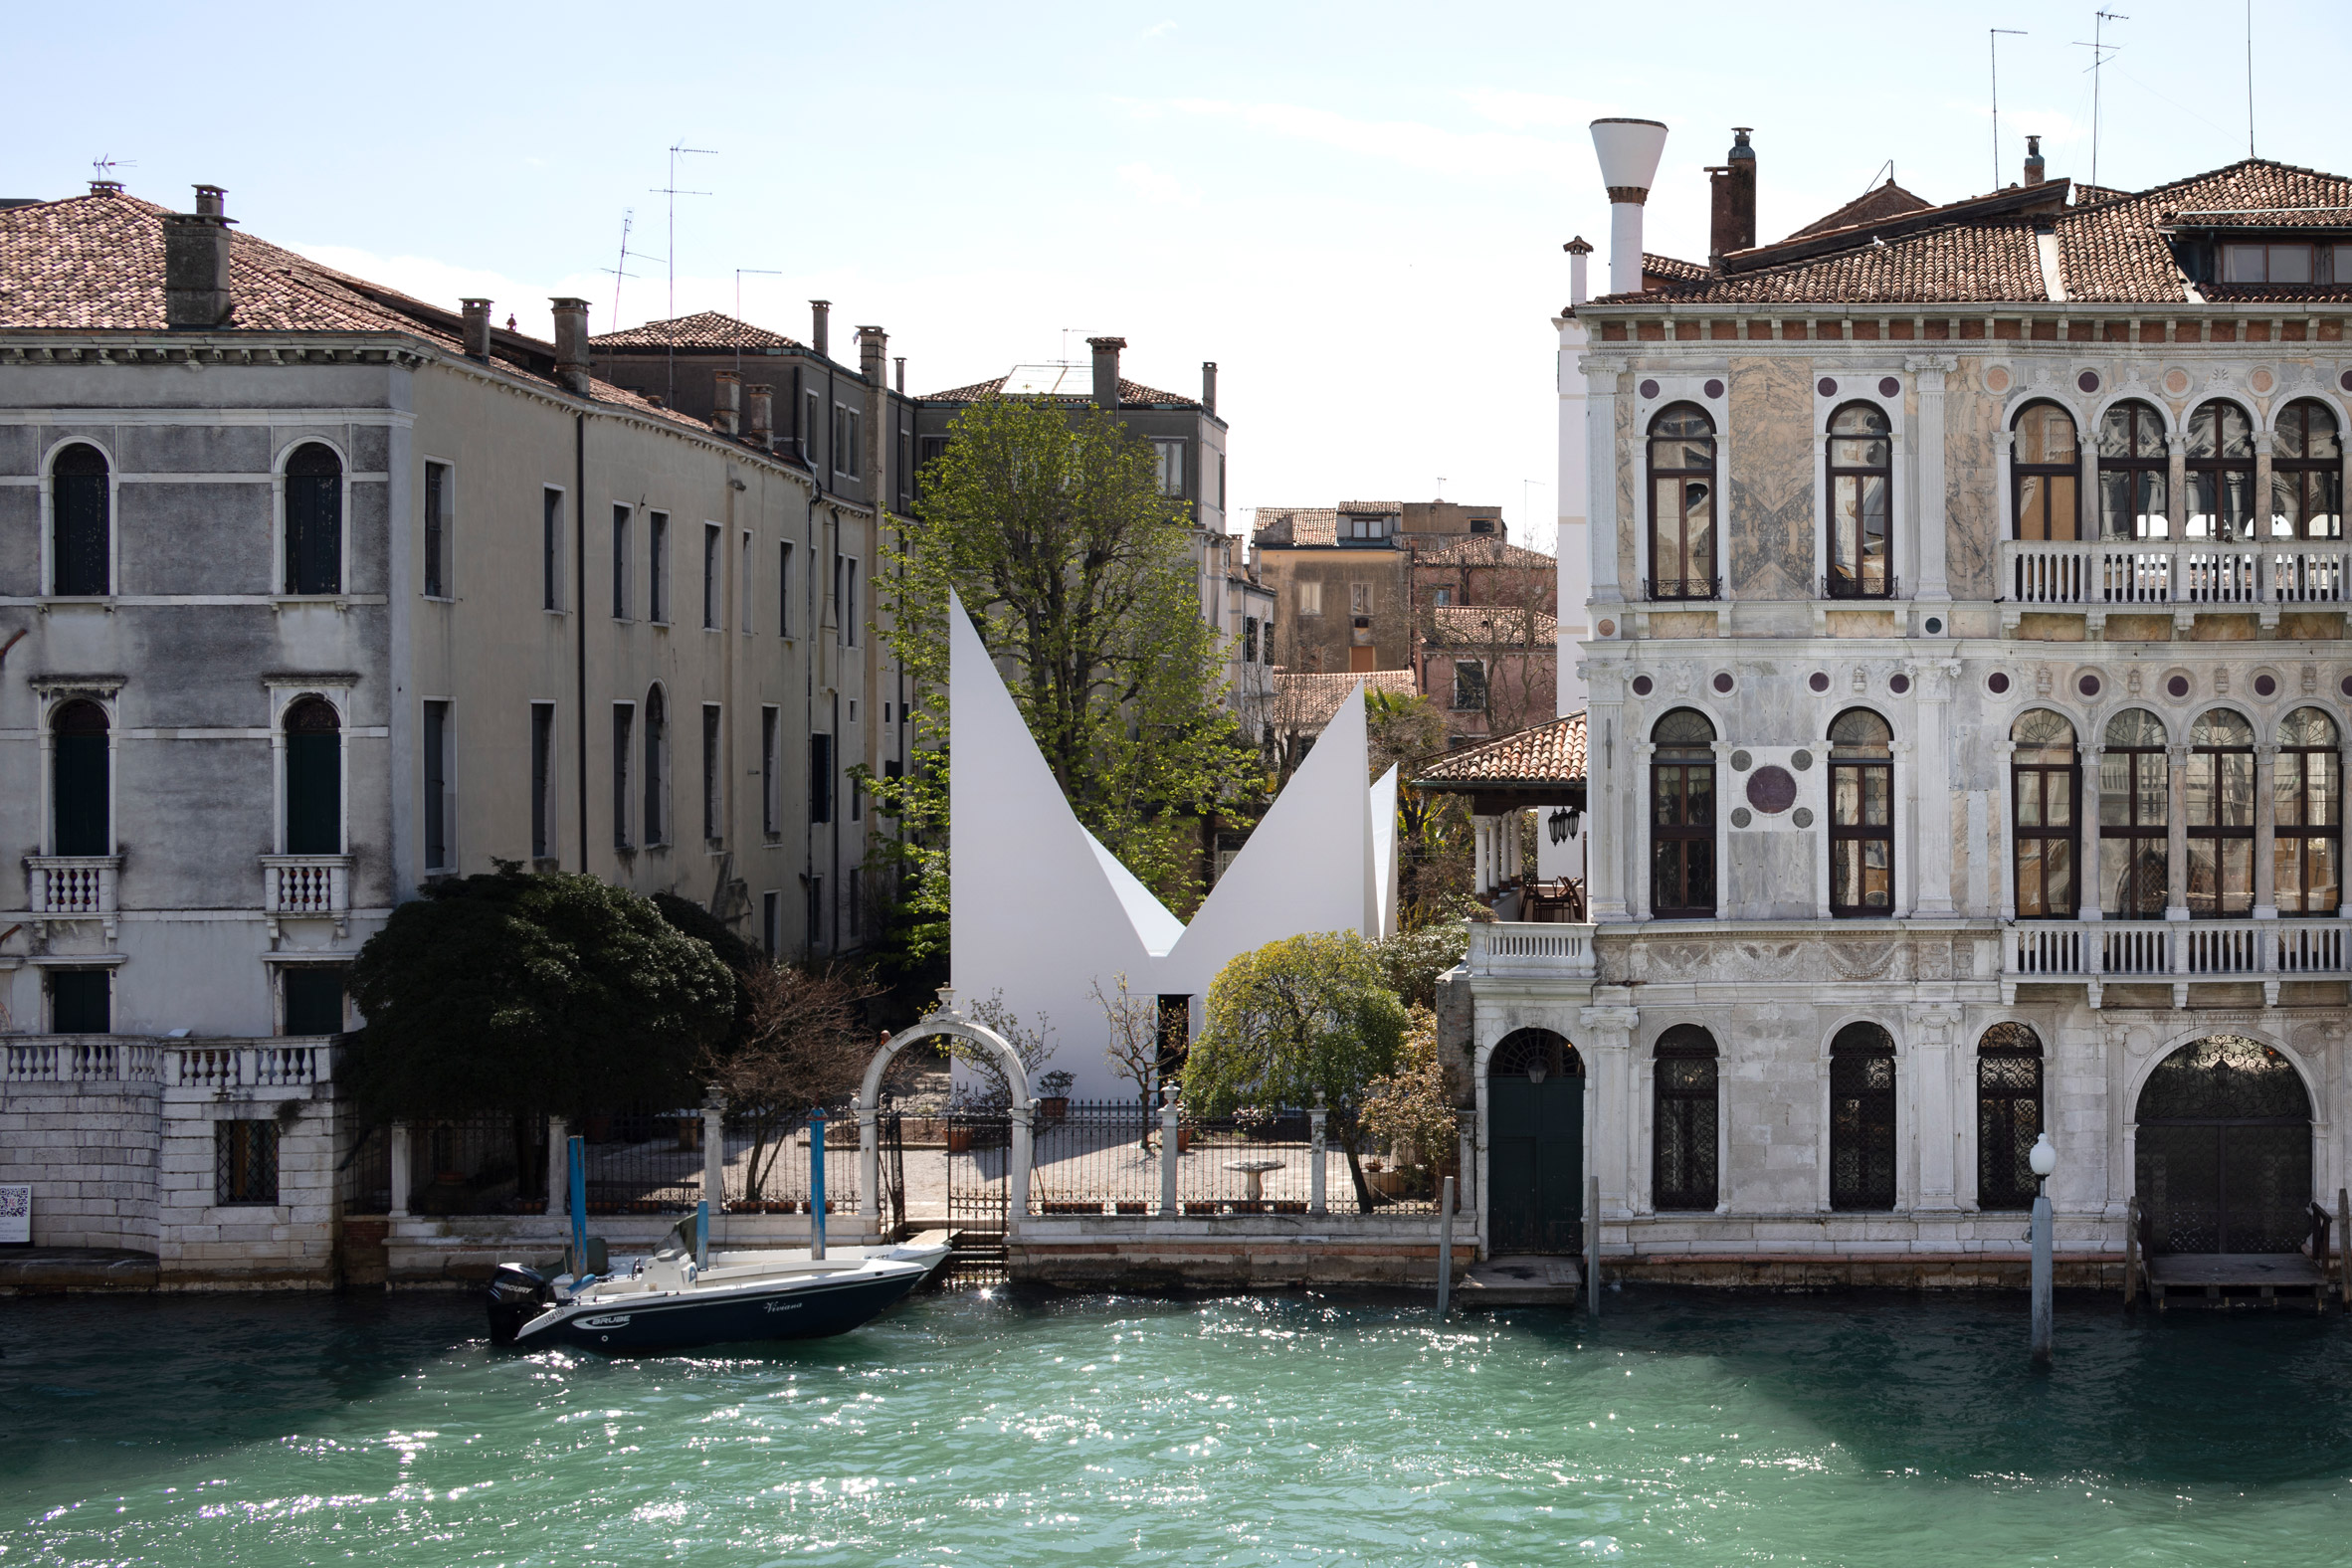 Pavilion beside the Grand Canal in Venice